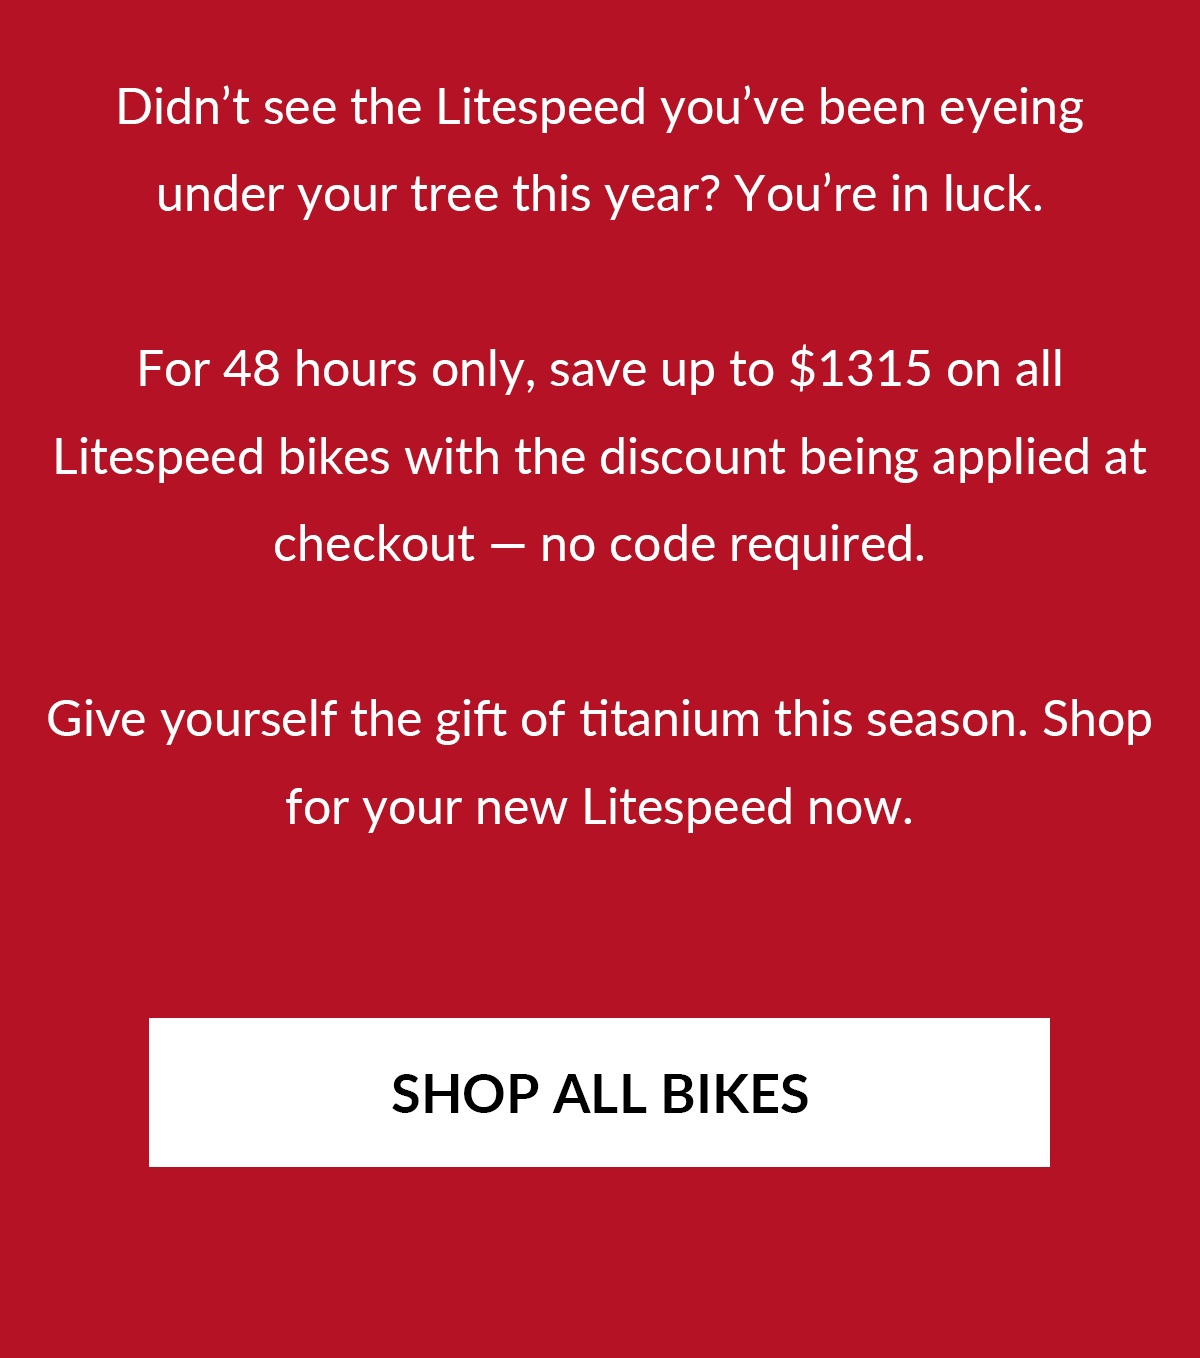 For 48 hours only, all Litespeed bikes are 10% off with the discount being applied at checkout. No code required.